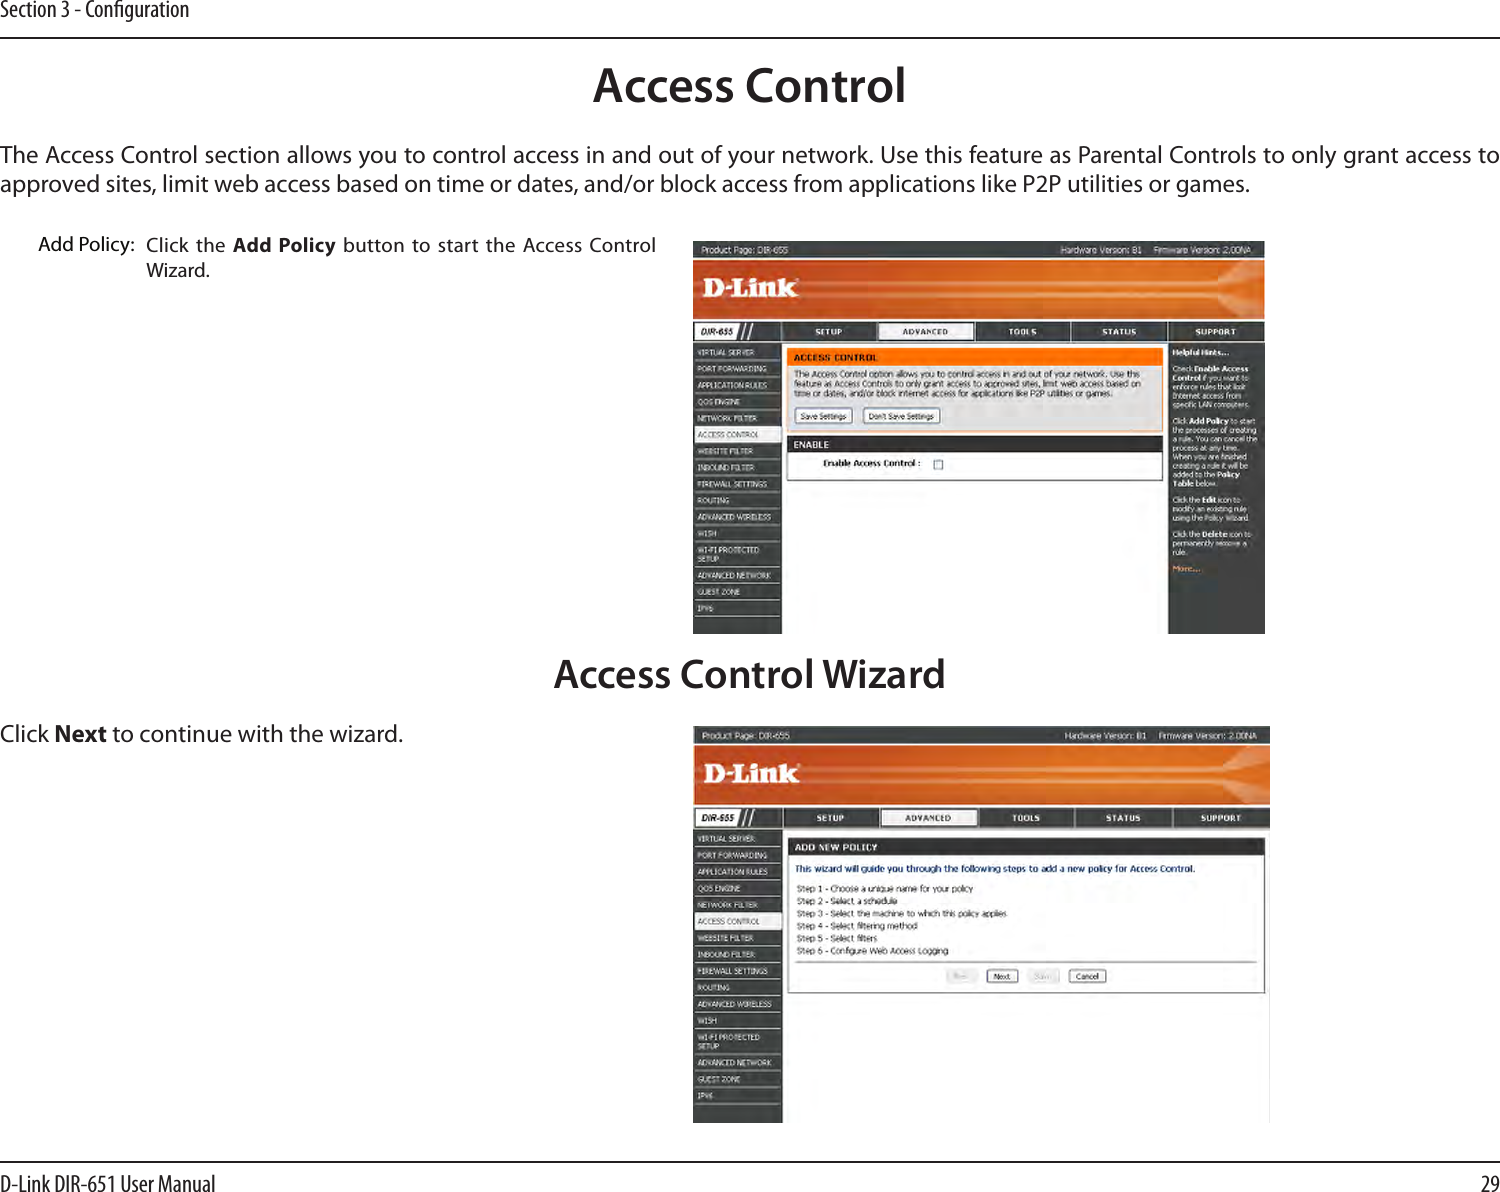 29D-Link DIR-651 User ManualSection 3 - CongurationAccess ControlClick the  Add Policy button  to start  the  Access Control Wizard. Add Policy:The Access Control section allows you to control access in and out of your network. Use this feature as Parental Controls to only grant access to approved sites, limit web access based on time or dates, and/or block access from applications like P2P utilities or games.Click Next to continue with the wizard.Access Control Wizard